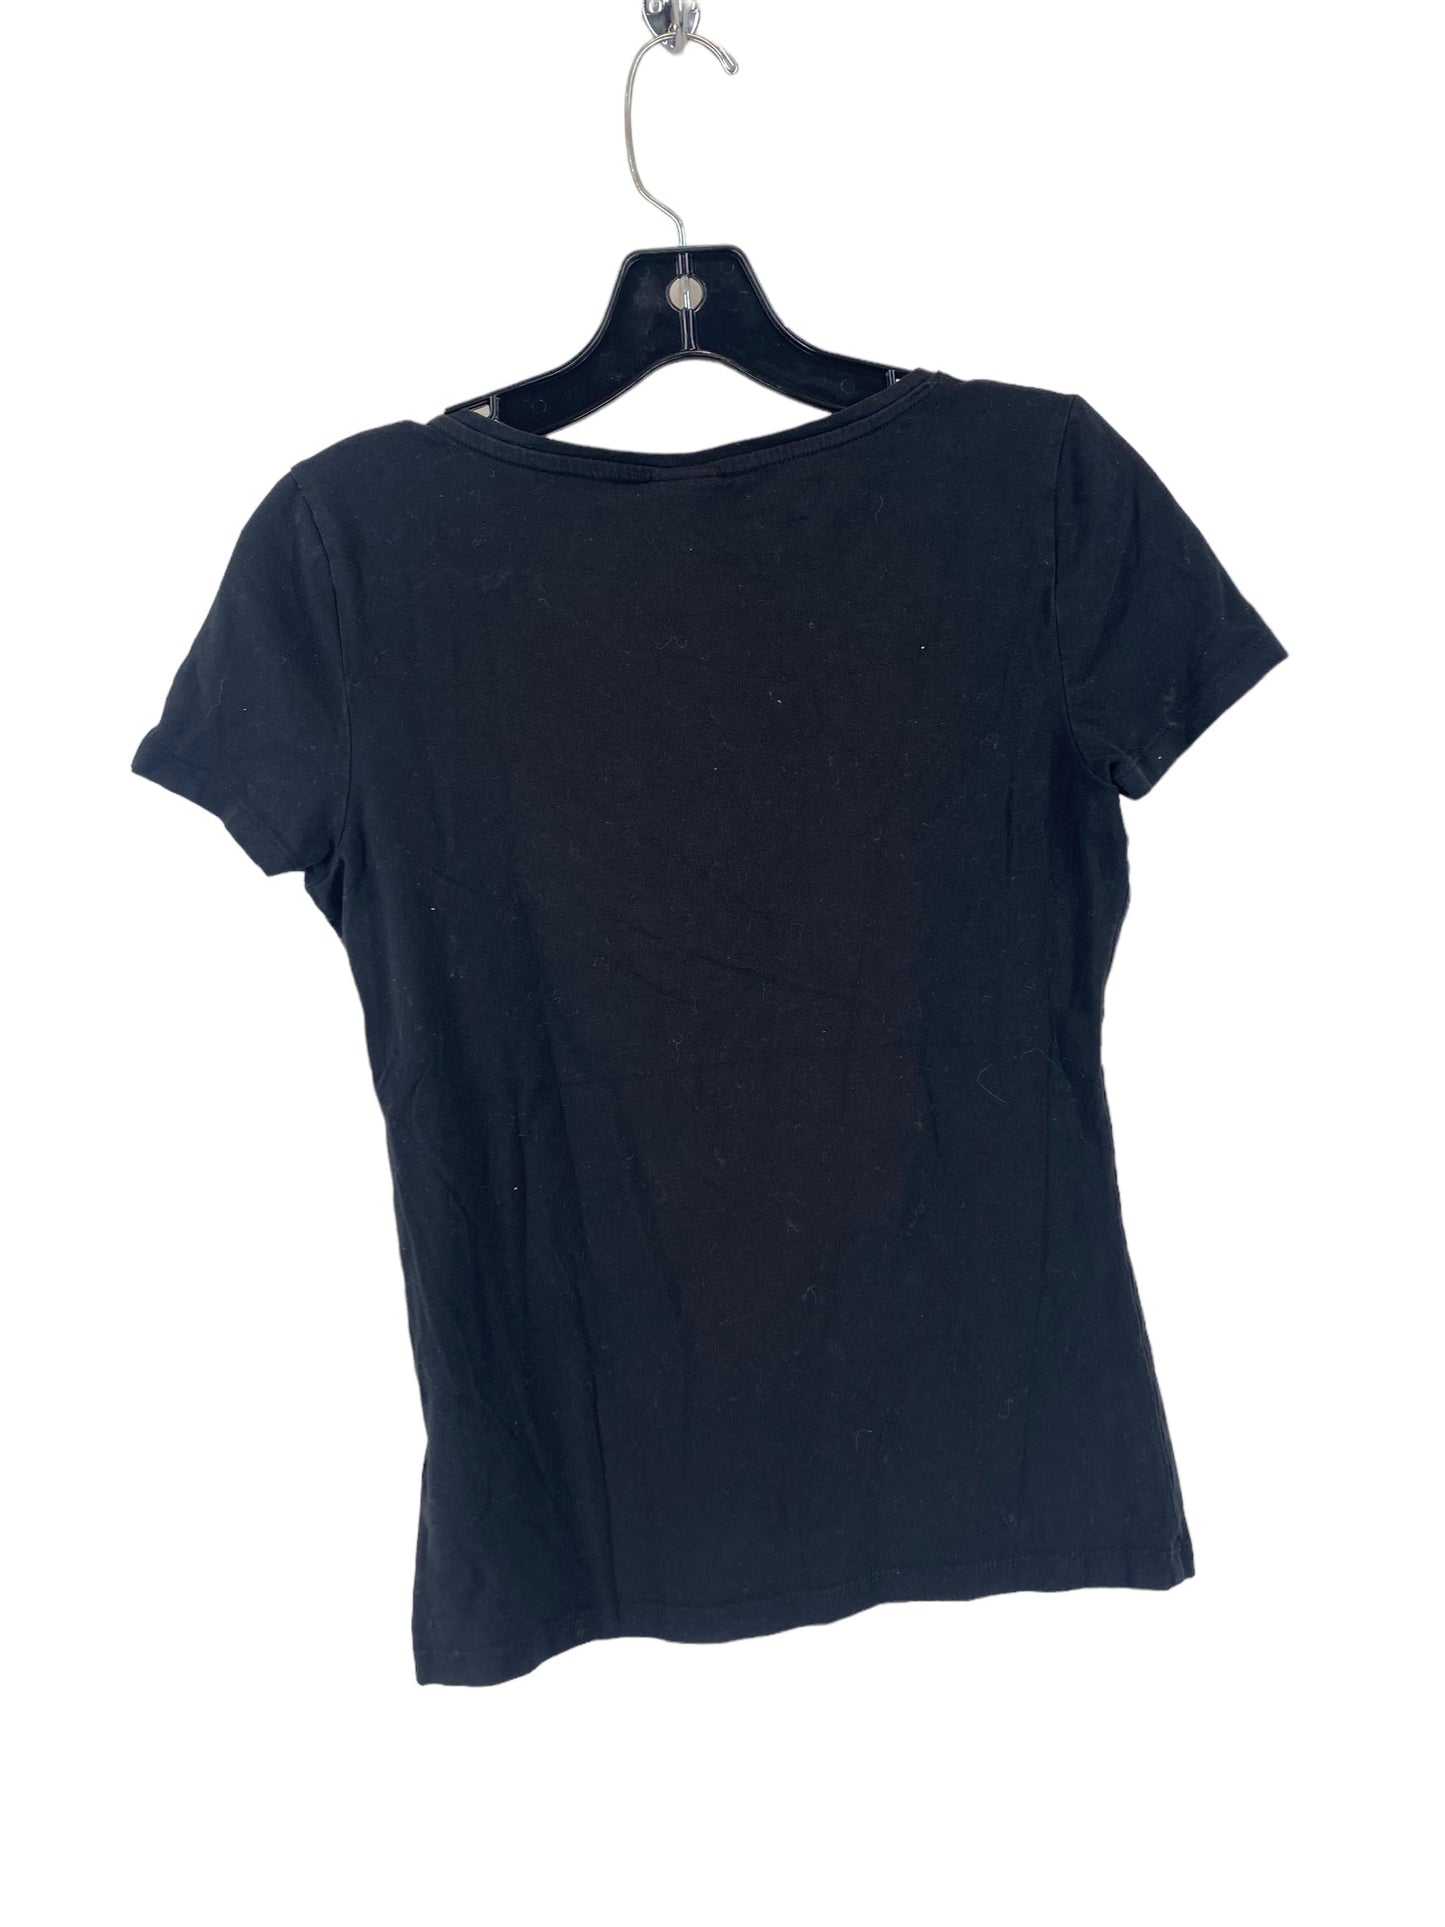 Top Short Sleeve Basic By H&m  Size: S